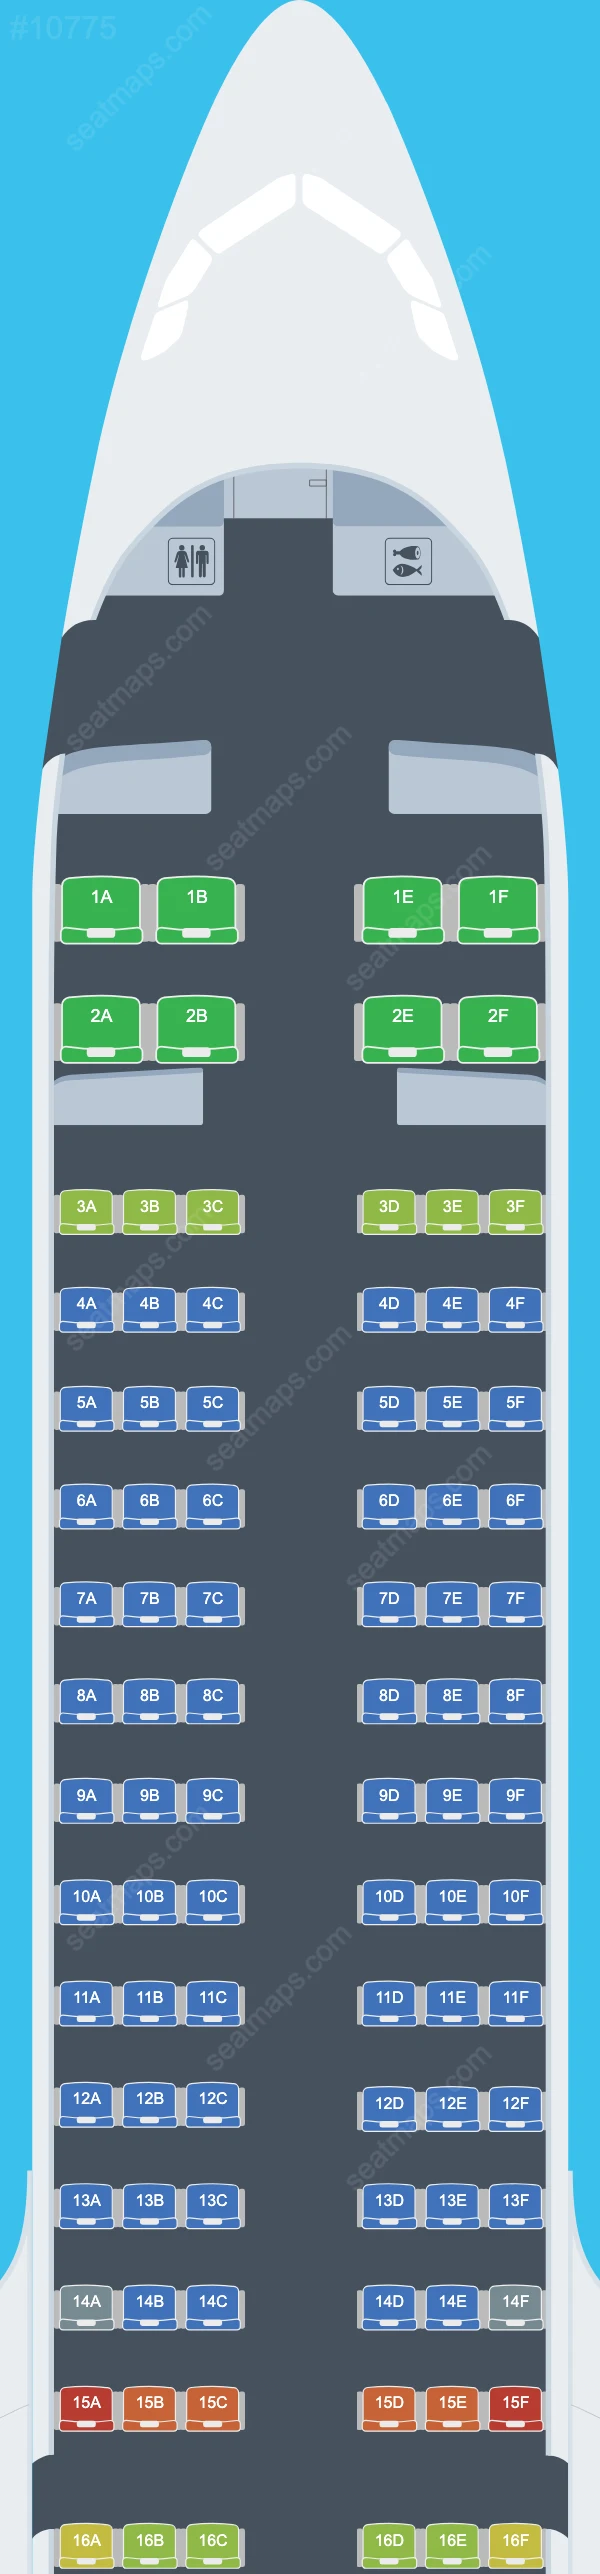 Turkish Airlines Airbus A321 Seat Maps A321-200neo NX V.1